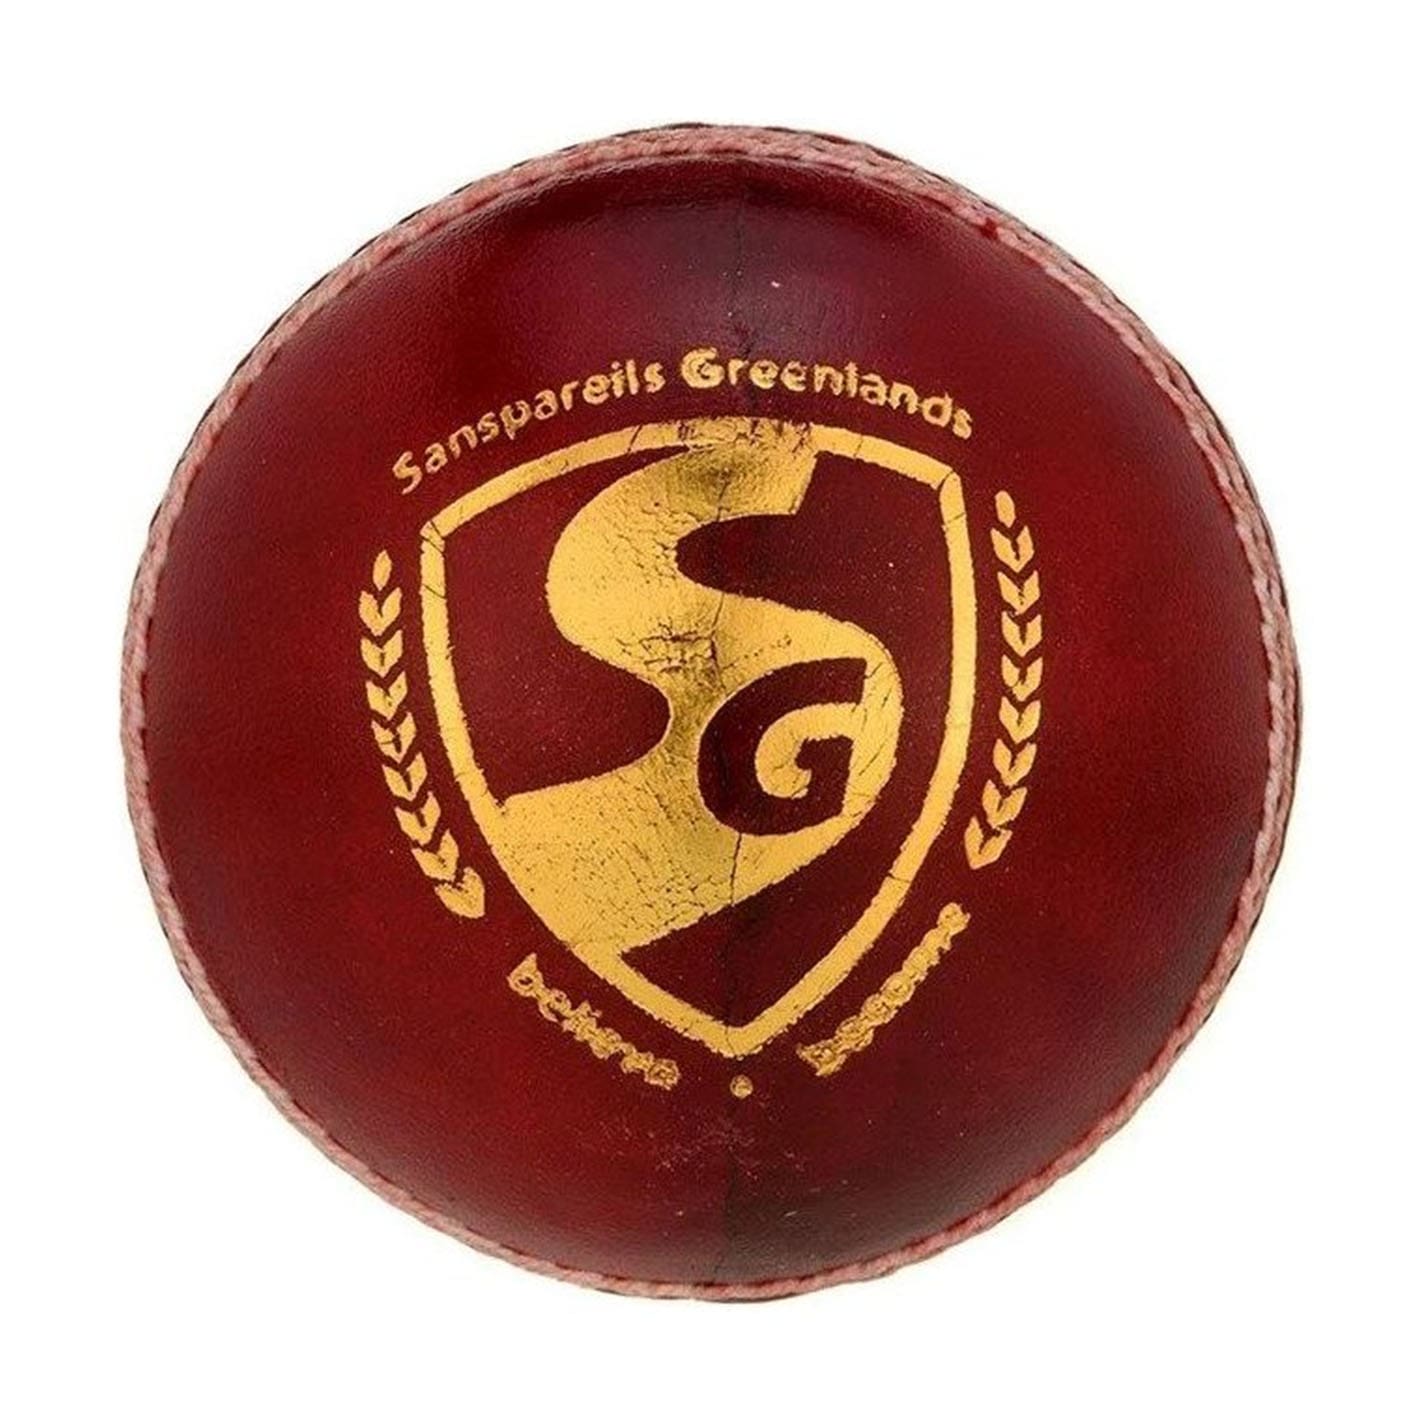 SG CLUB™ RED CRICKET LEATHER BALL